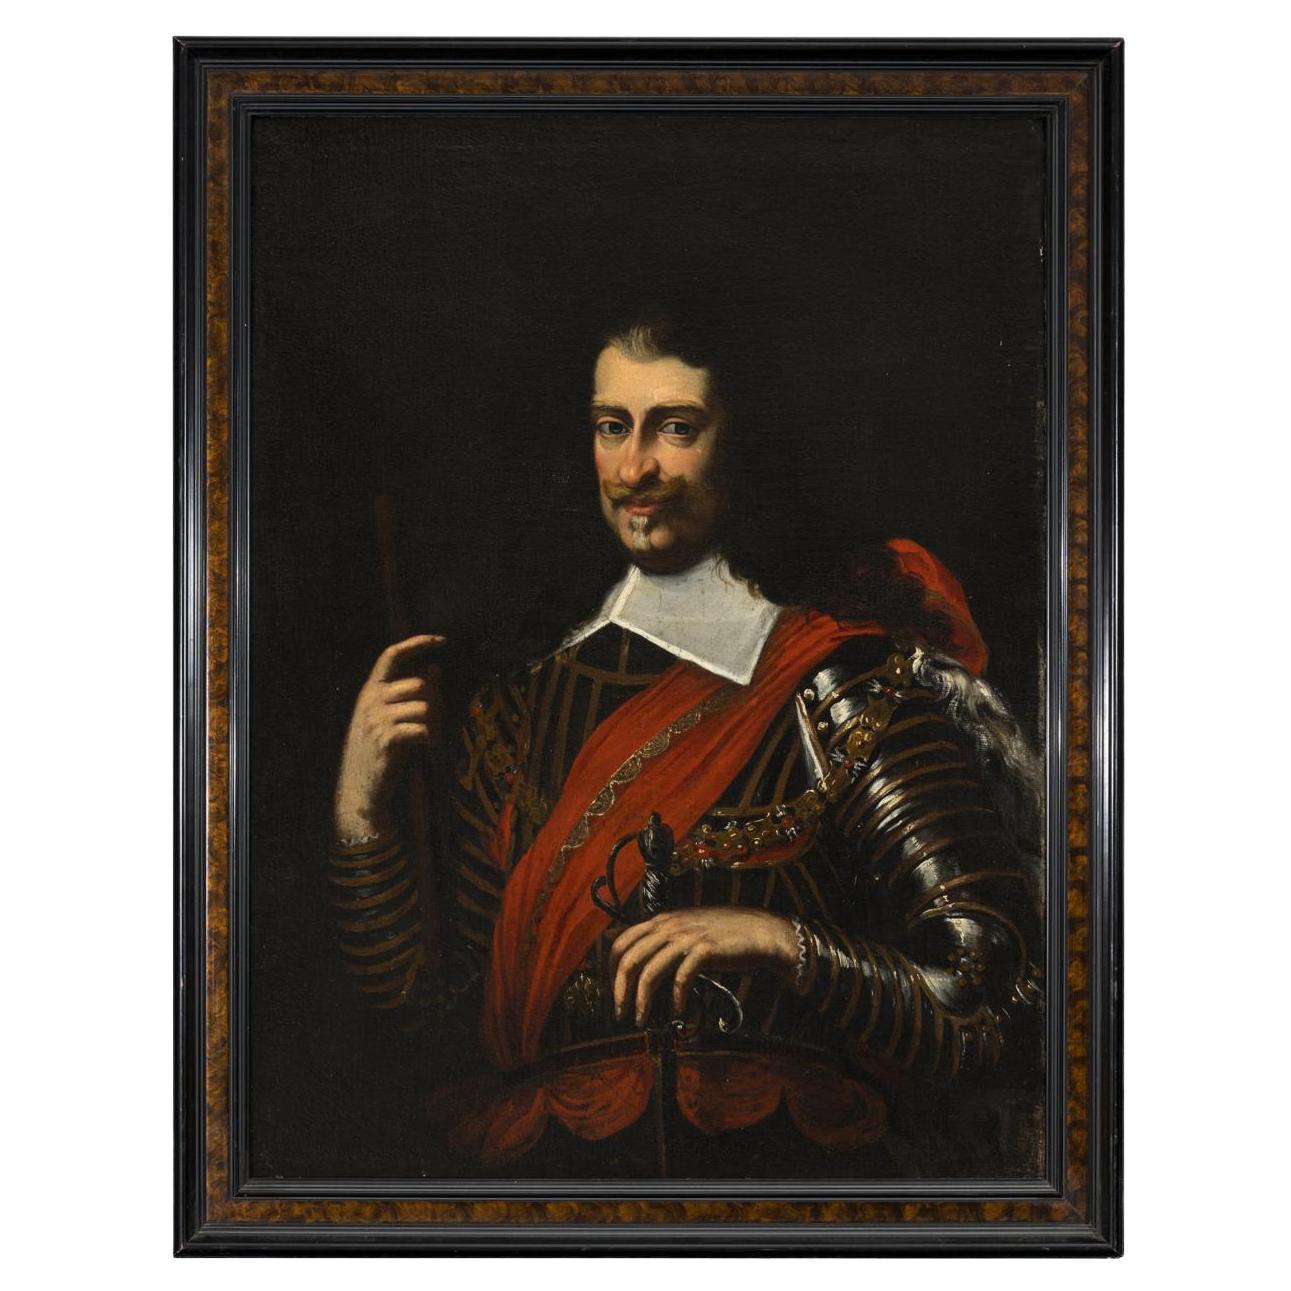 Diego Velázquez (Seville 1599 - Madrid 1660) circle of Portrait of a Leader 17th For Sale